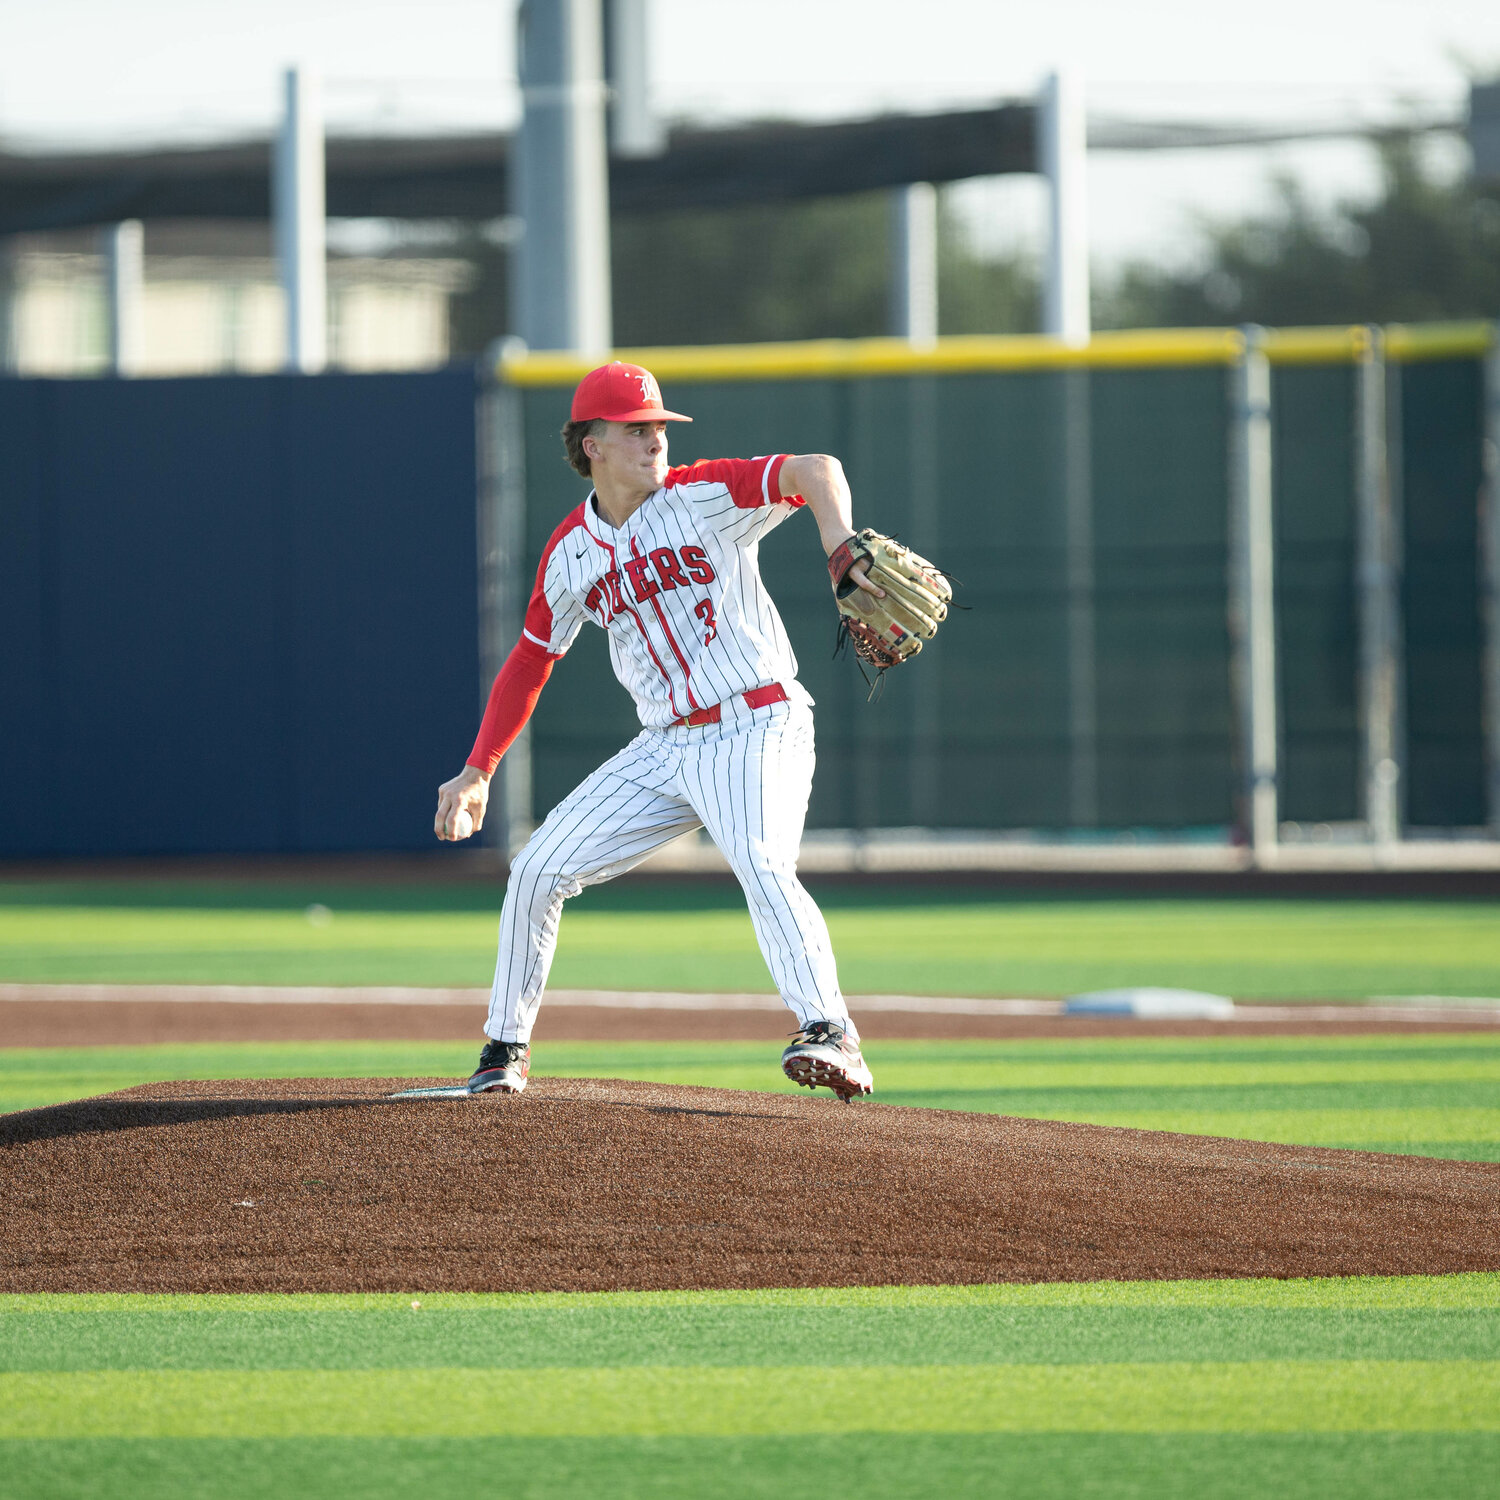 Caleb Koger pitches during Thursday's Regional Quarterfinal between Katy and Tompkins at Cy-Springs.